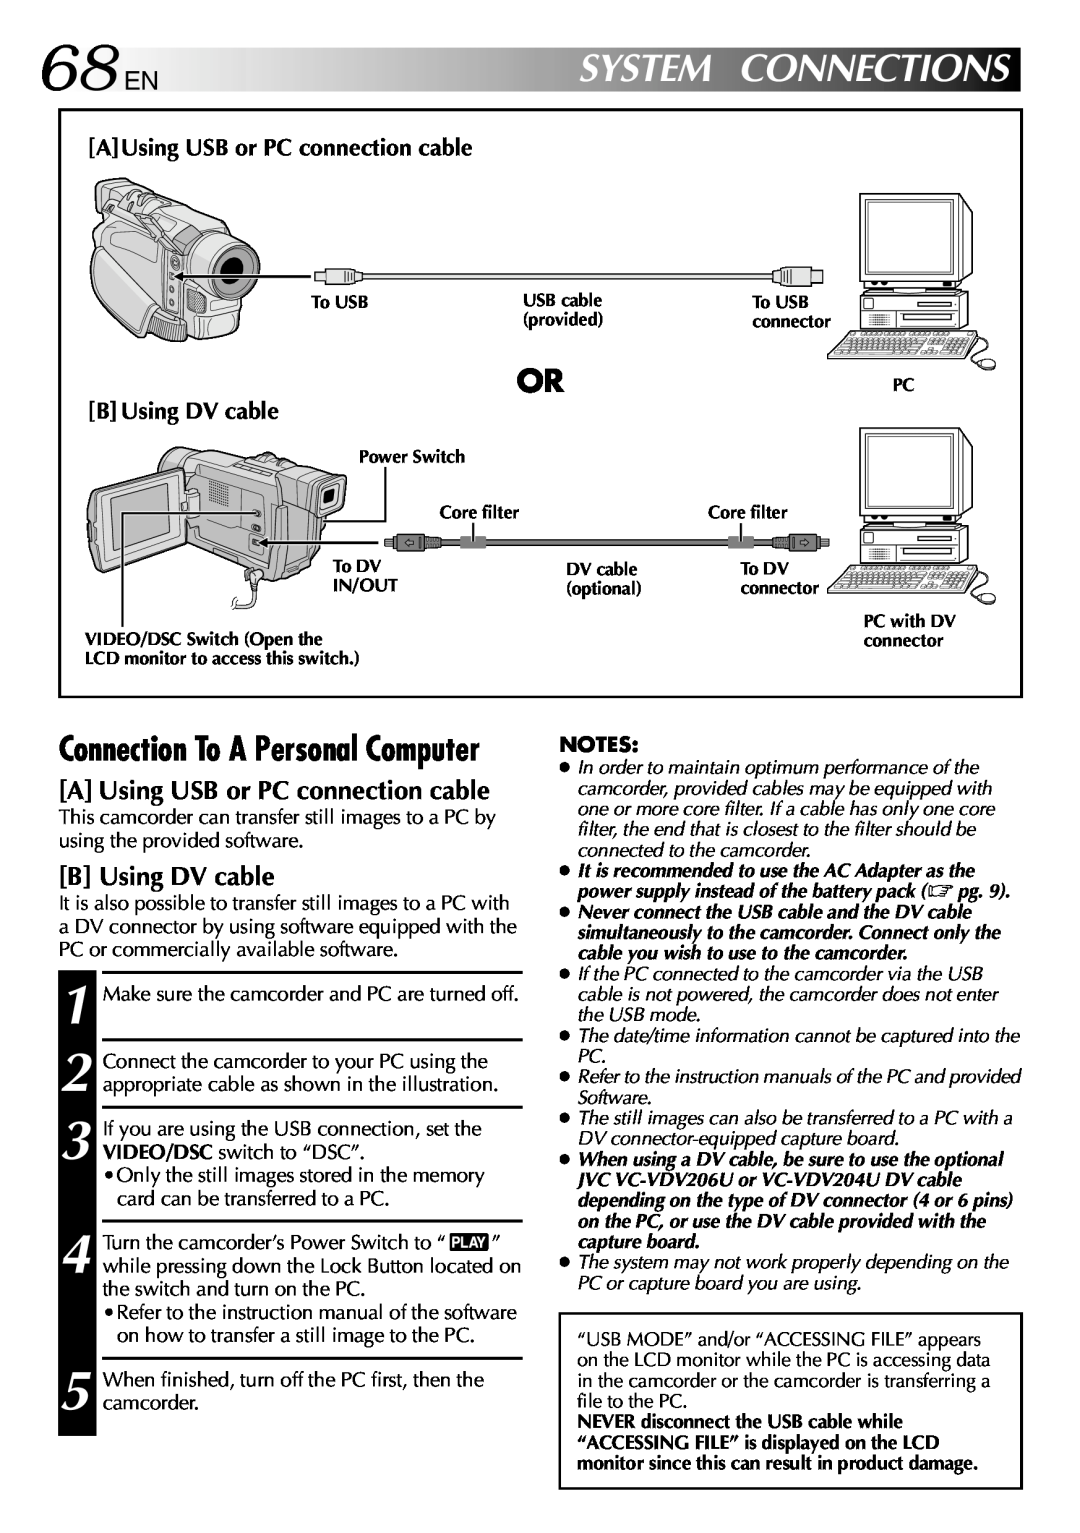 JVC GR-DVL512 68 EN, System, Connections, Connection To A Personal Computer, A Using USB or PC connection cable 